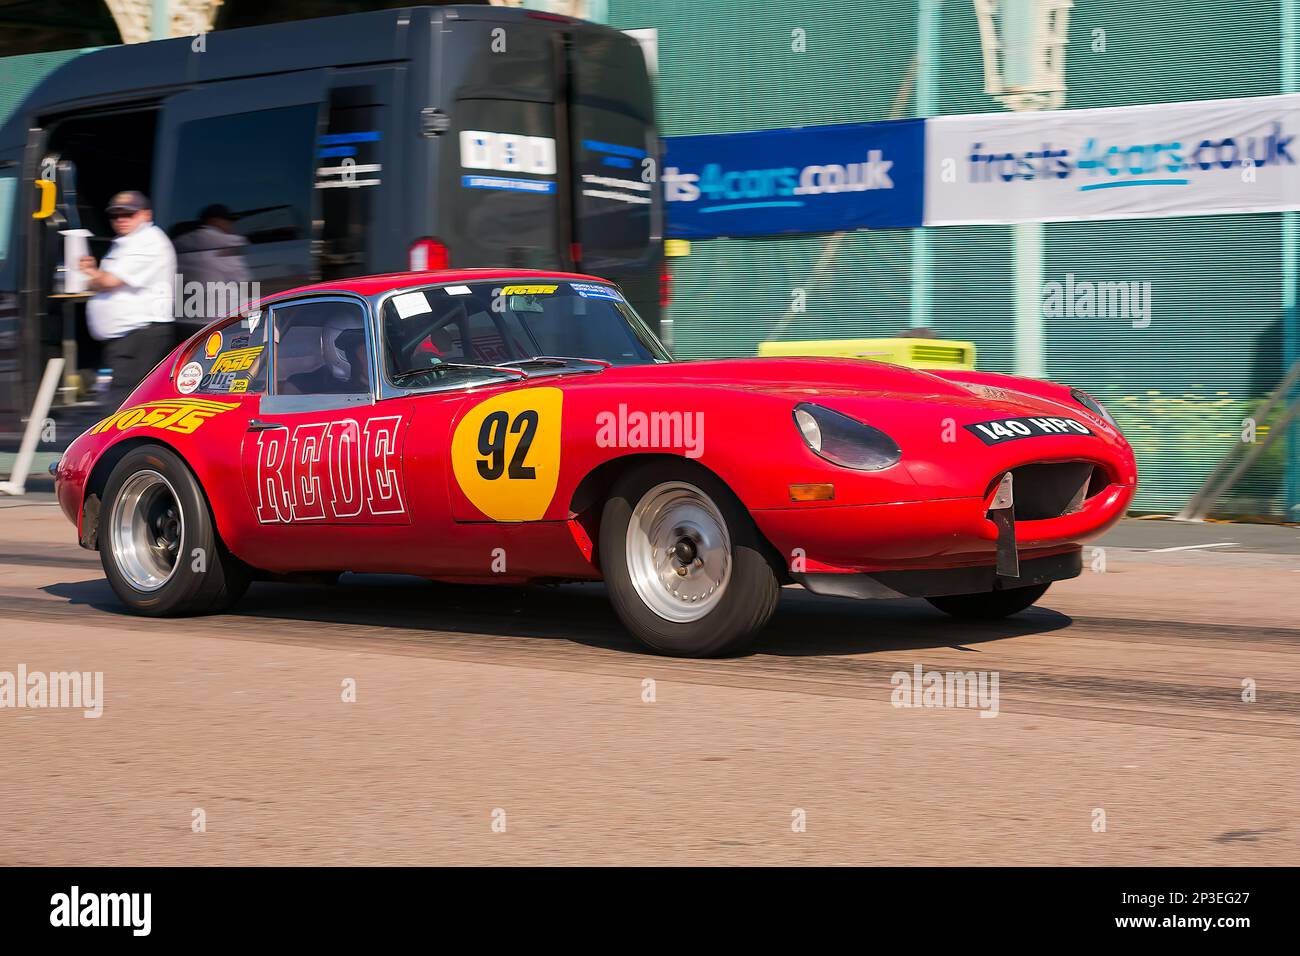 Robert Oram driving a Jaguar E Type aka Jaguar XK-E at The Brighton National Speed Trials 2018. This is the oldest motor racing event in the UK and is held in the south east coastal town of Brighton. Madeira drive is a road which runs along the seafront and is normal full of people explorer the beach, pier and local attractions. Today it is turned in to a 1/4 time trial course. 1st September 2018. Stock Photo